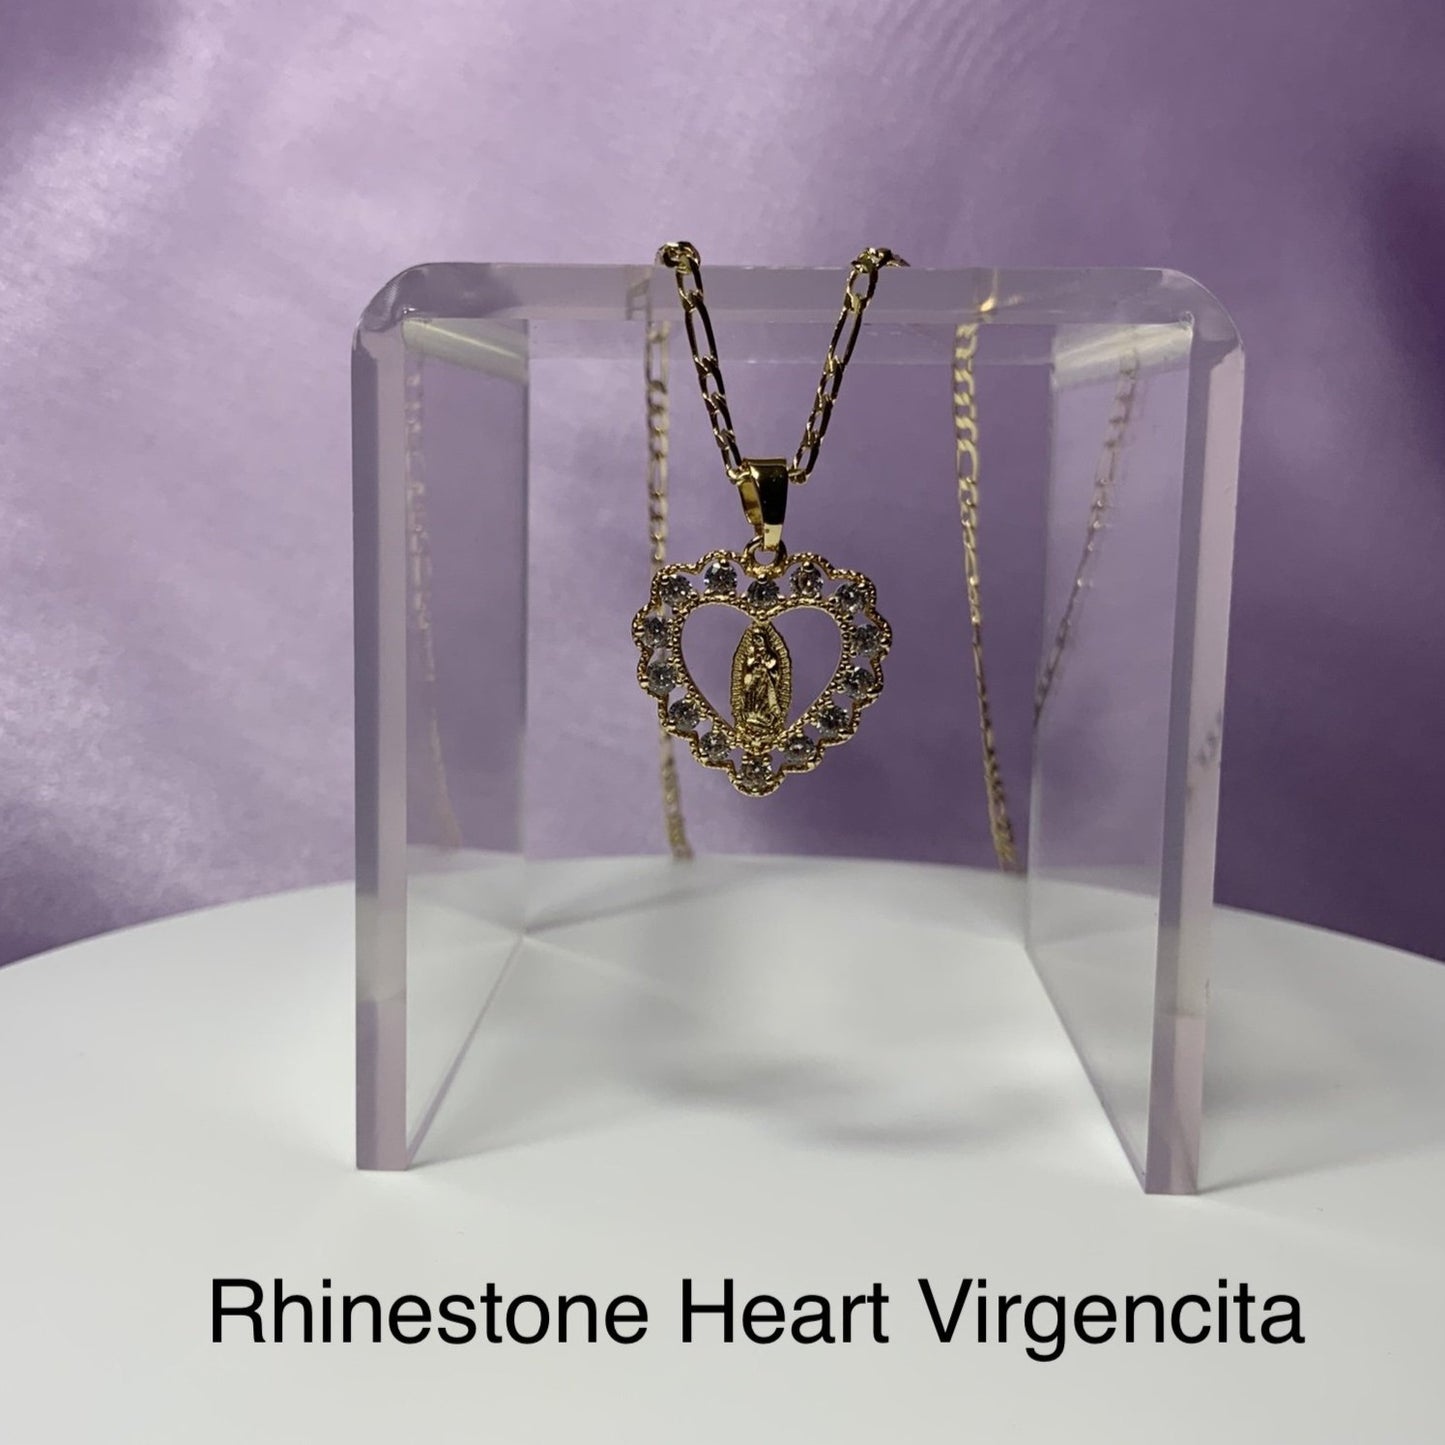 Heart virgencita pendant with rhinestones on gold necklace displyed. Virgen mary jewelry. Virgen maria jewelry. Joyas virgencita. Virgencita.